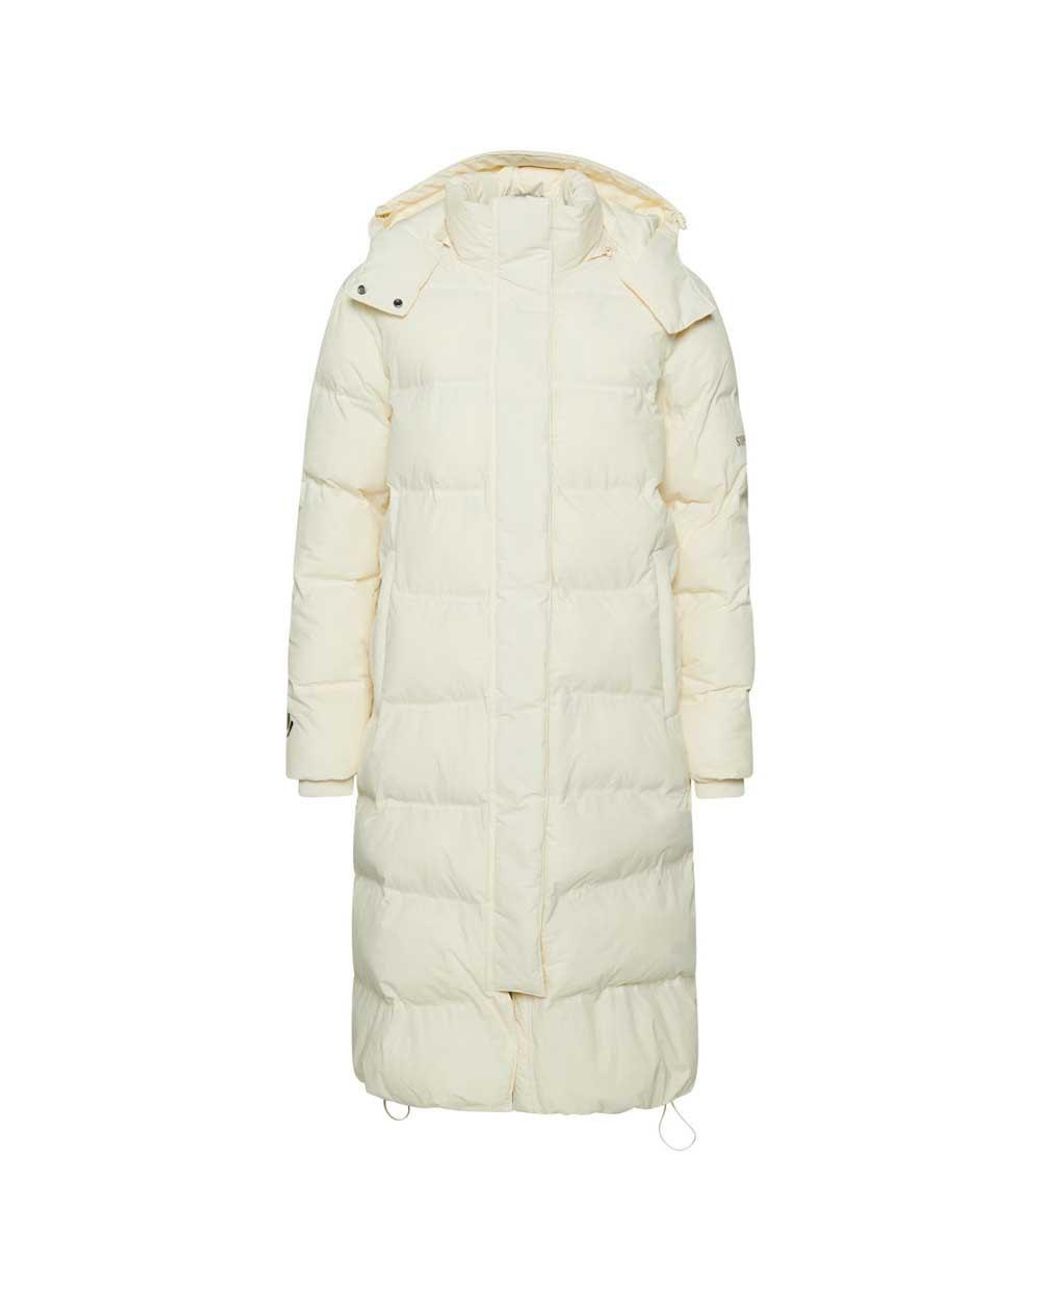 Superdry Uperdry Train Longline Padded Jacket in Natural | Lyst